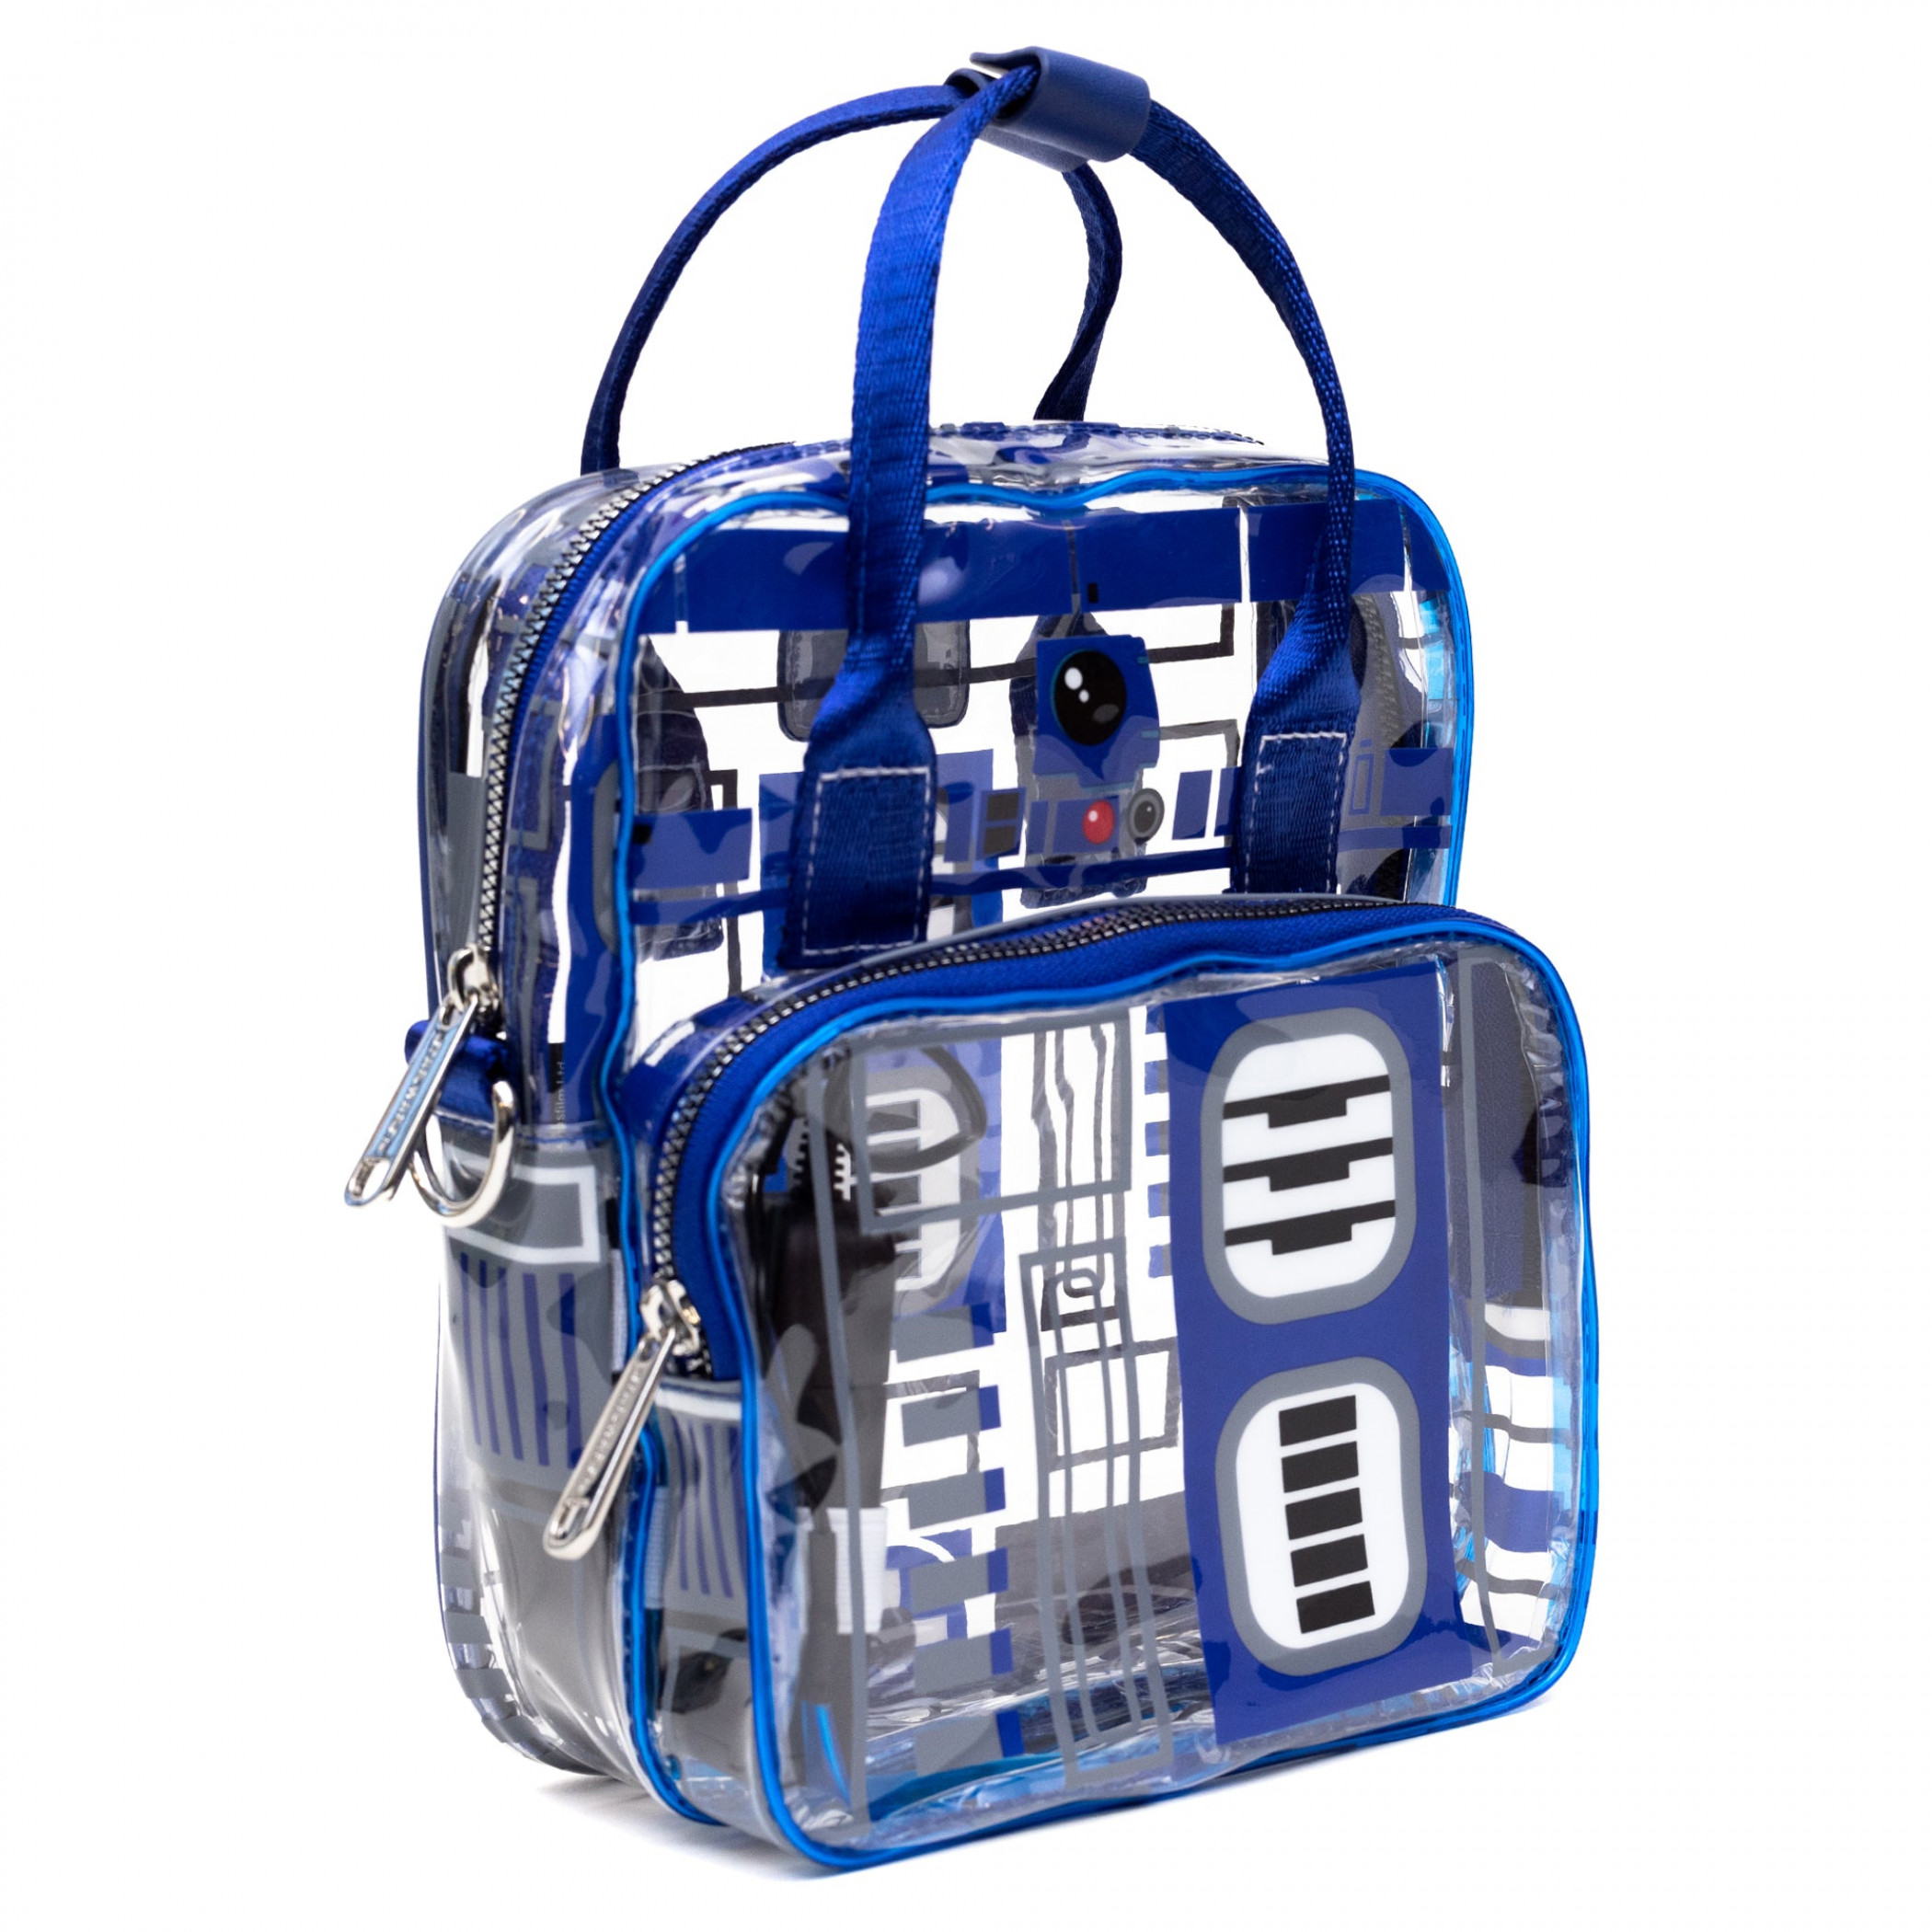 Star Wars R2-D2 Clear Light-Up Crossbody Bag with Handles